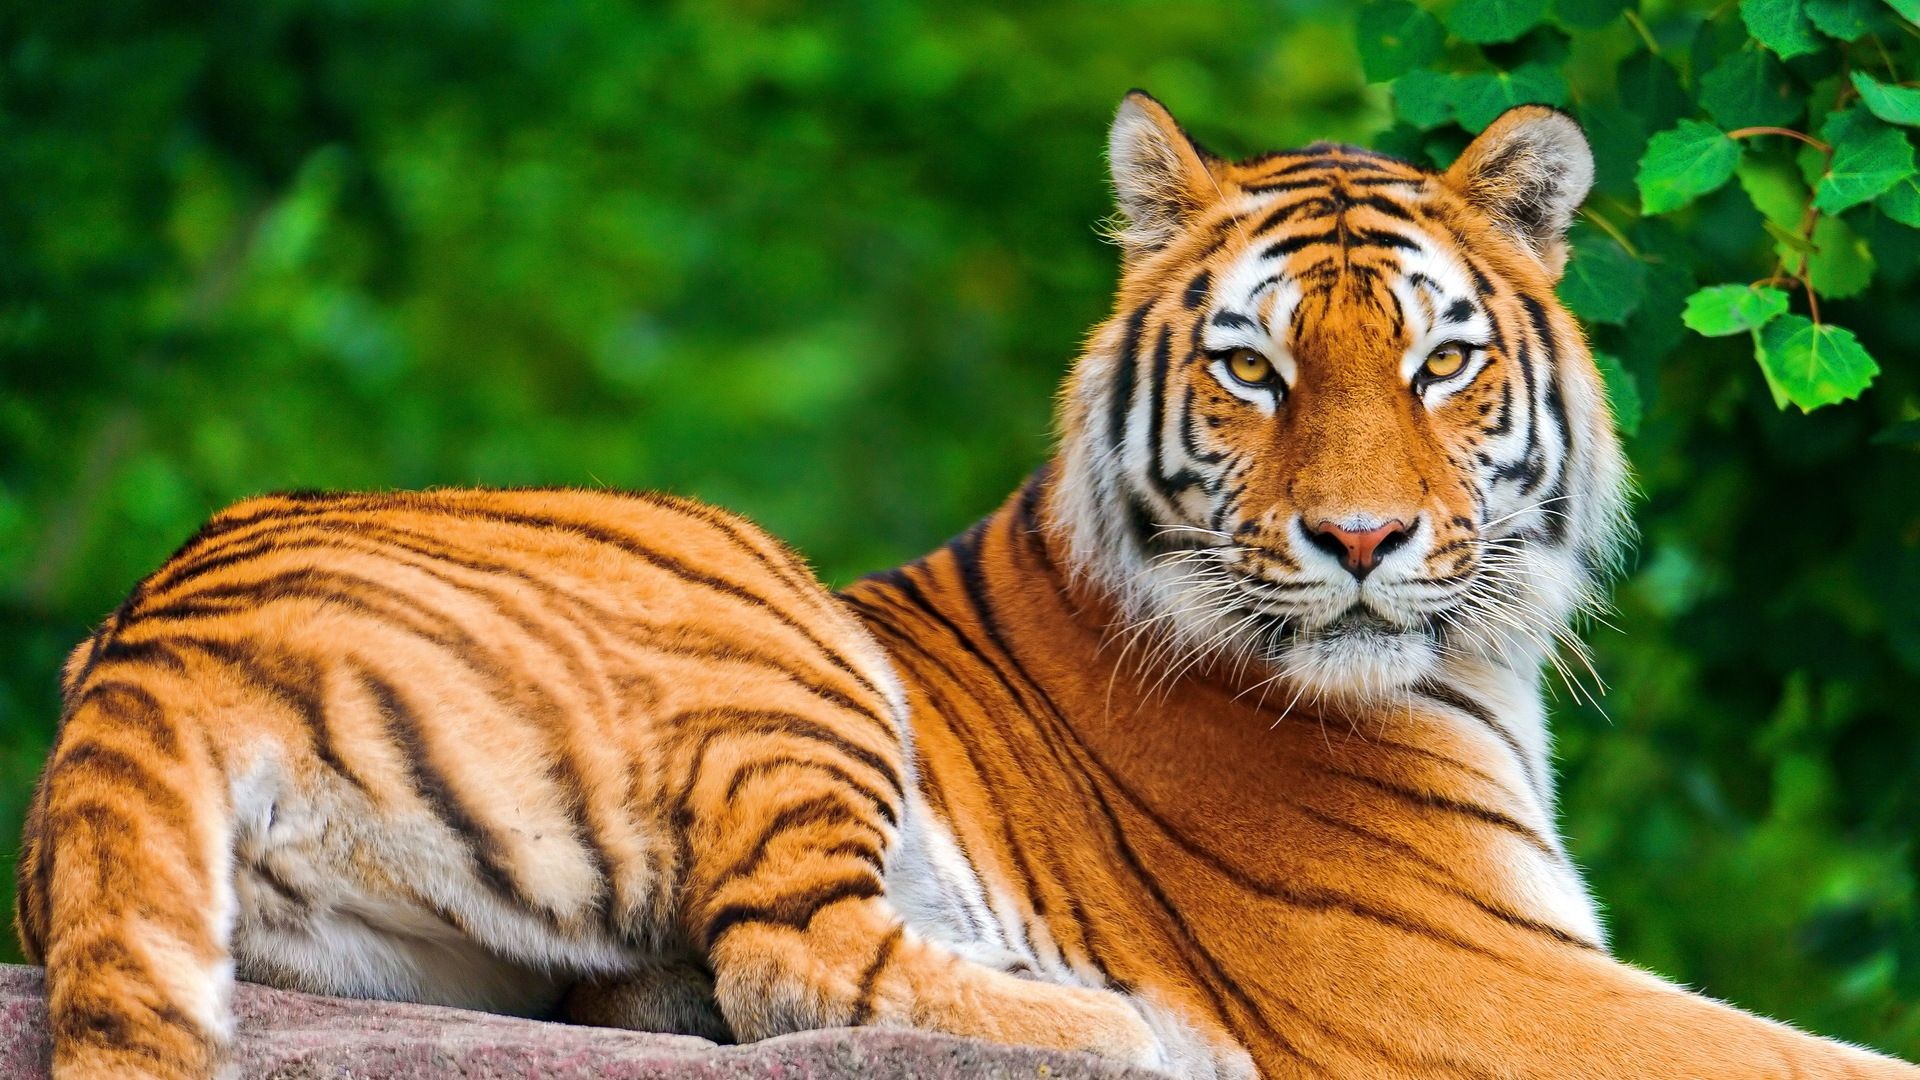 76 Tiger Hd Wallpapers on WallpaperPlay